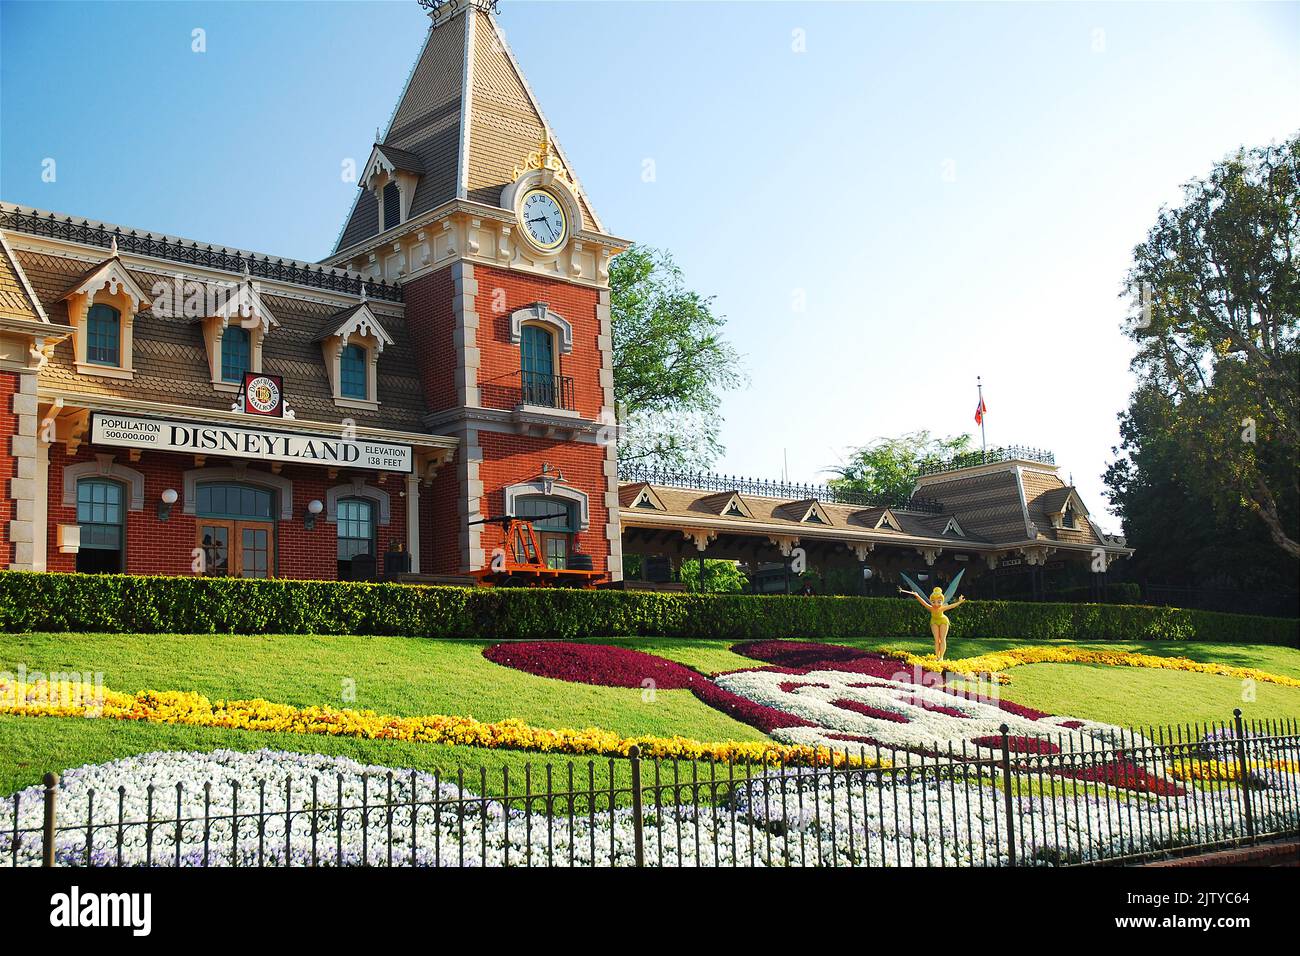 A depiction of Mickey Mouse, made of flowers in a garden, stands in front of the Disneyland train station near the entrance to the amusement park Stock Photo